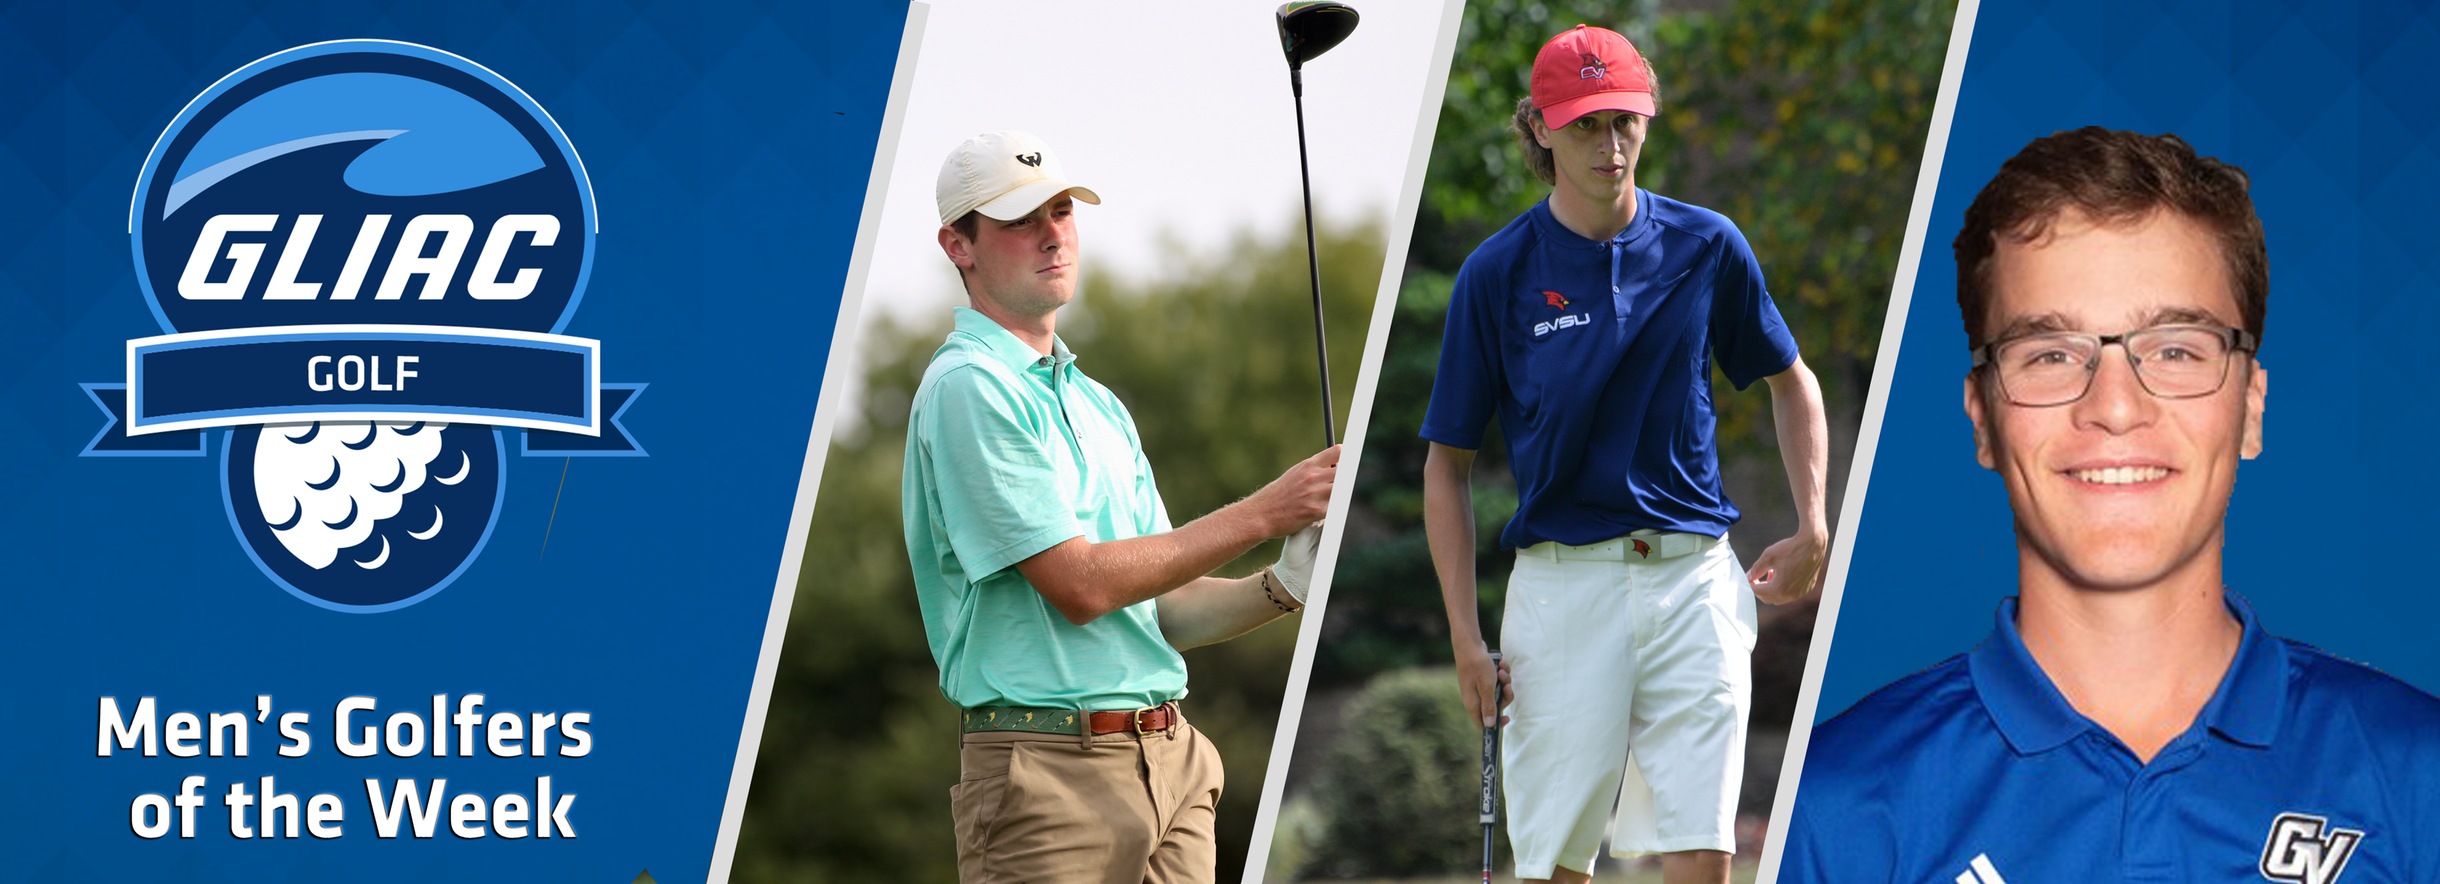 GLIAC Announces Male Golfers of the Week for the Month of September